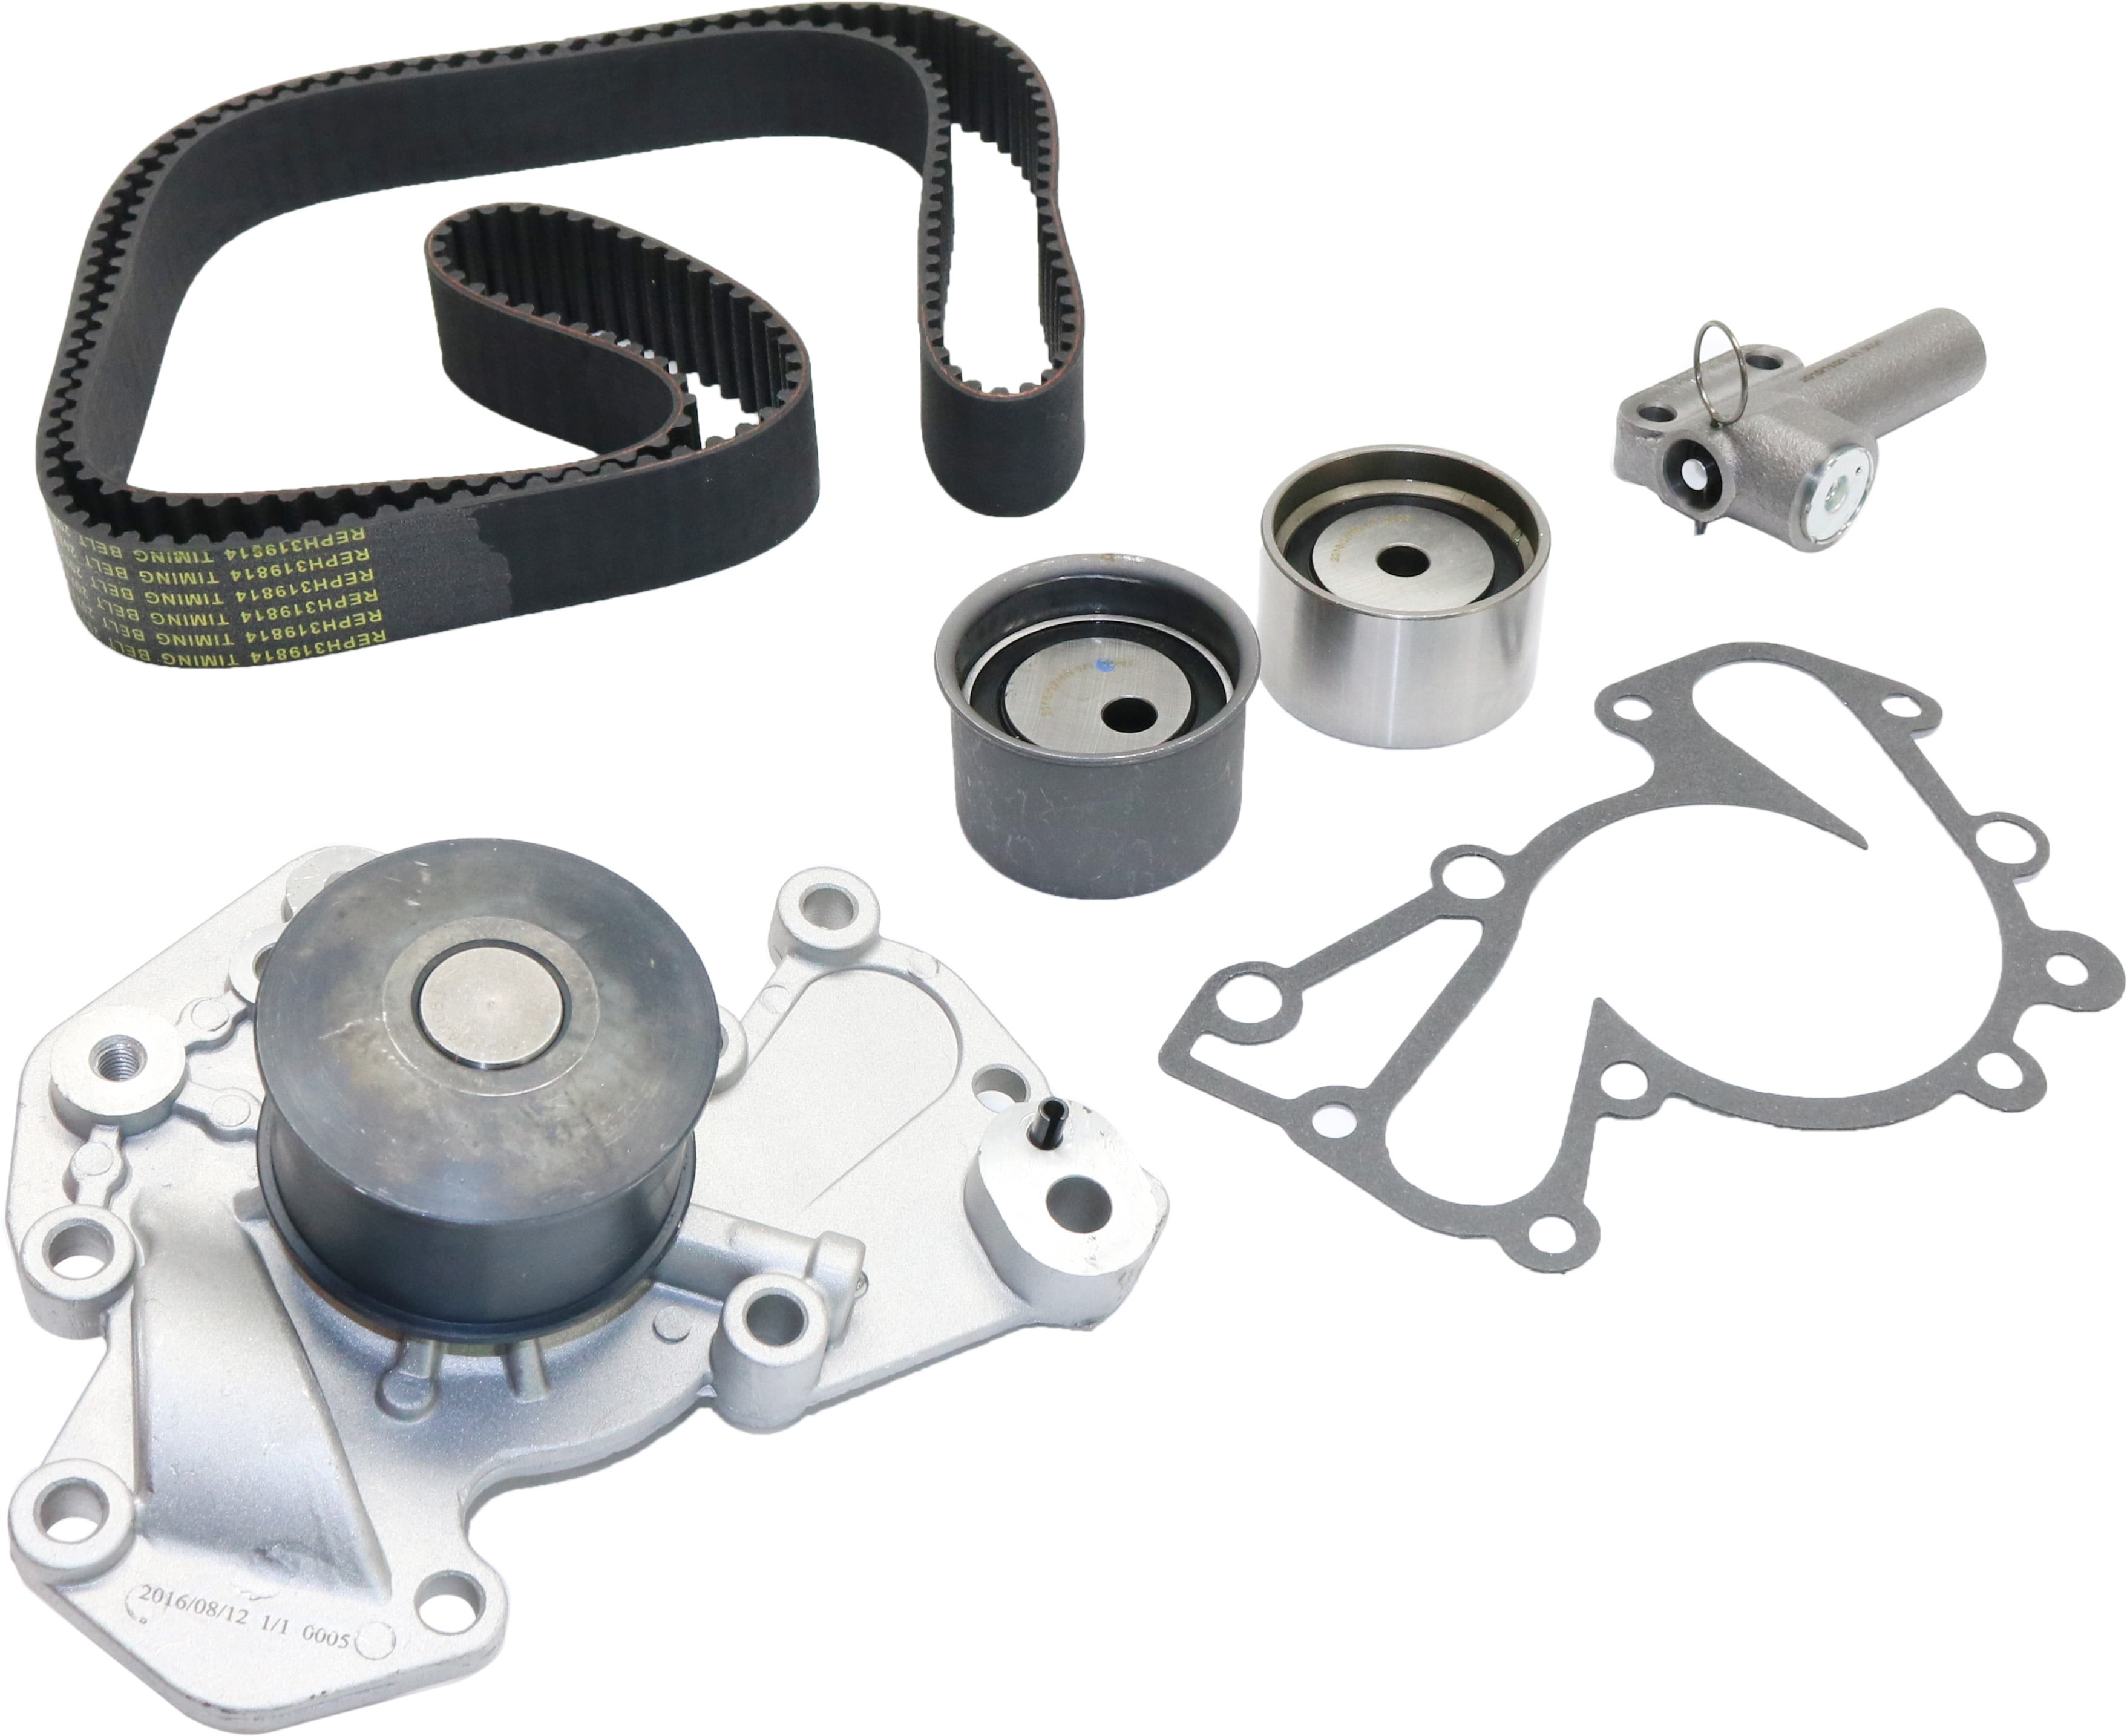 Replacement REPH319814 Timing Belt Kit Compatible with 1999-2005 Hyundai  Sonata 2001-2005 Kia Optima 6Cyl 2.7L 2.5L Water Pump Included 